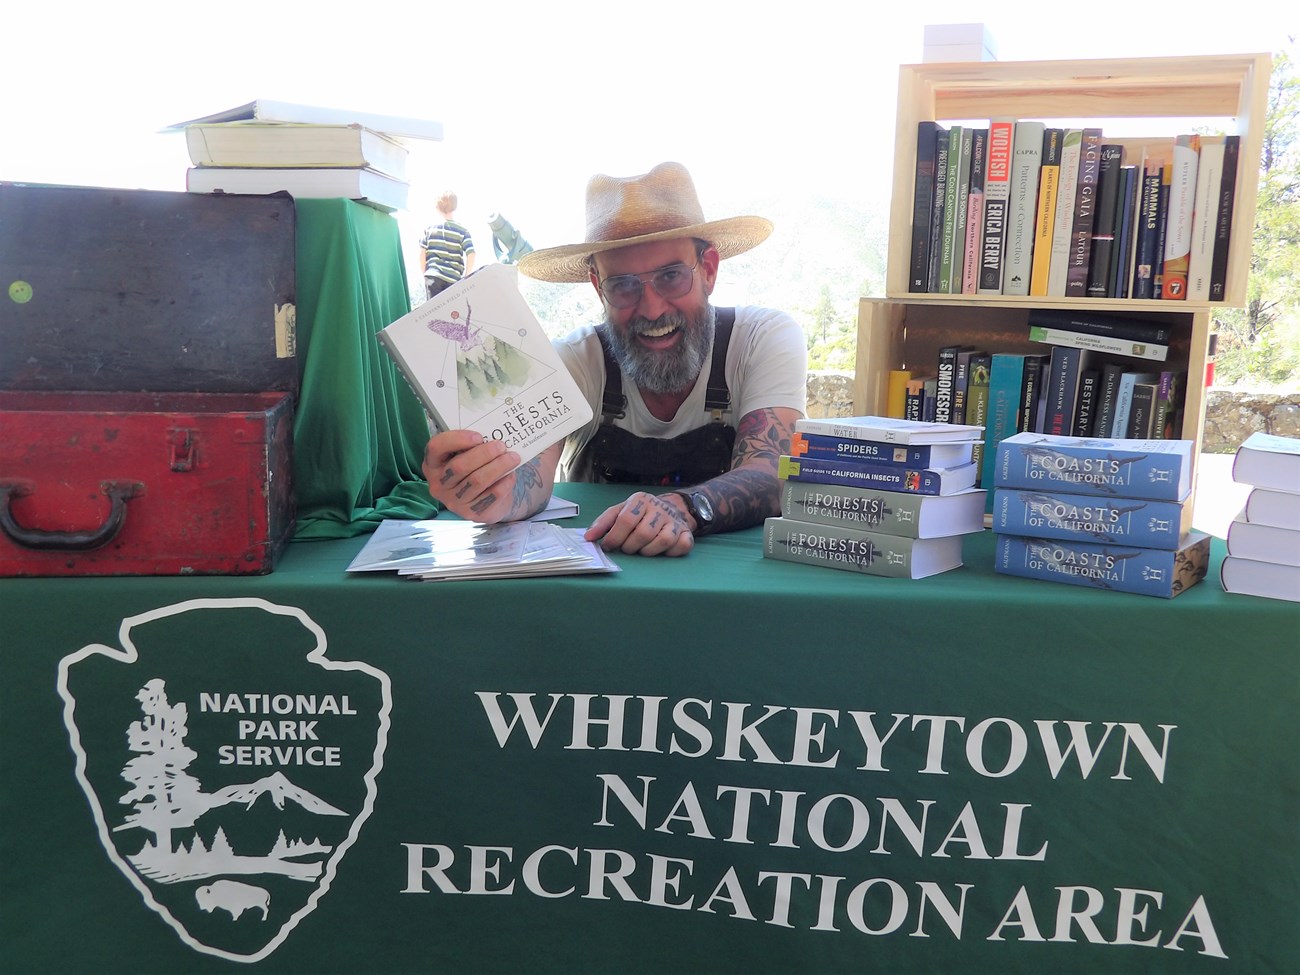 Obi Kaufmann, with beard, straw hat, suspenders, and white shirt, smiling at camera and holding up his book. Obi is sitting behind a table with a green table cloth and several books are on top of the table.